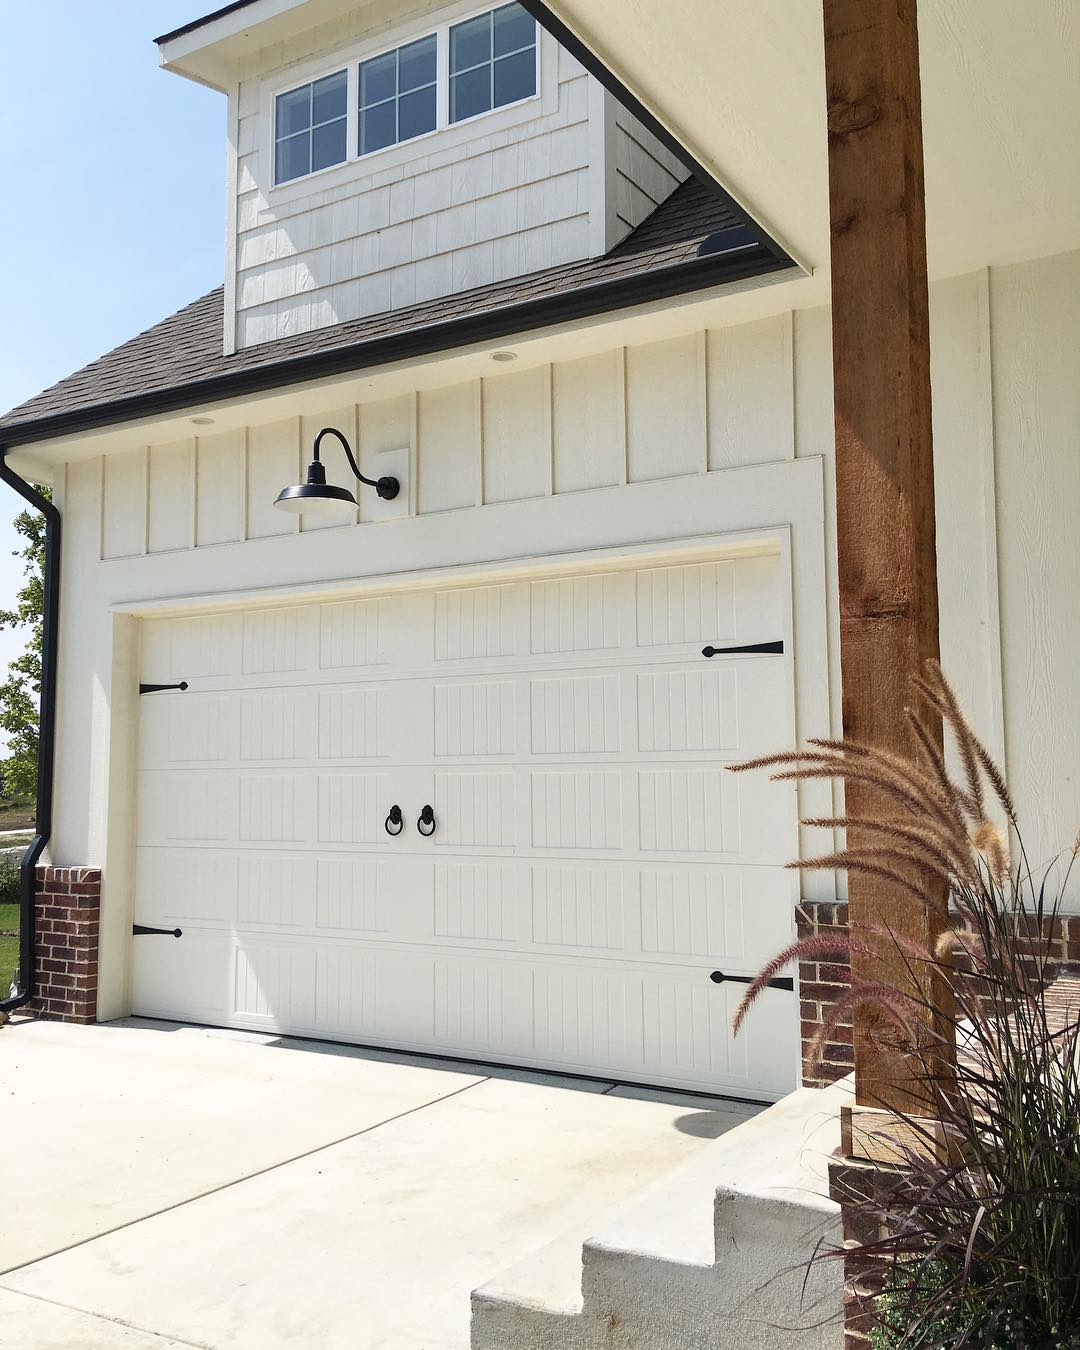 garage door with farmhouse style pieces added photo by Instagram user @concretecottage